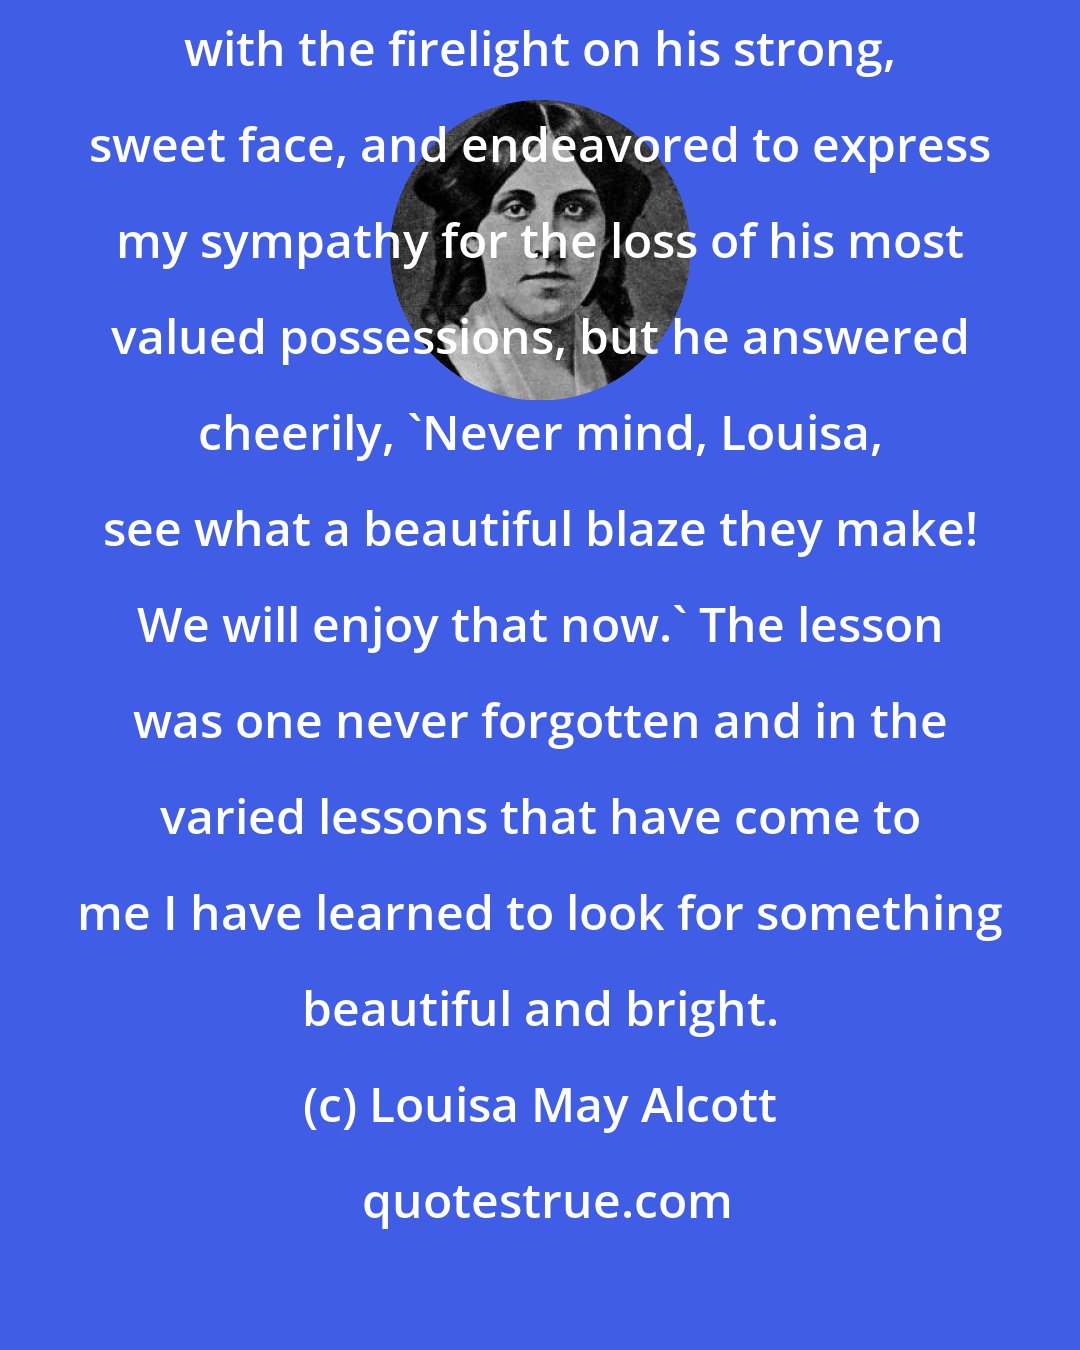 Louisa May Alcott: When Emerson's library was burning at Concord, I went to him as he stood with the firelight on his strong, sweet face, and endeavored to express my sympathy for the loss of his most valued possessions, but he answered cheerily, 'Never mind, Louisa, see what a beautiful blaze they make! We will enjoy that now.' The lesson was one never forgotten and in the varied lessons that have come to me I have learned to look for something beautiful and bright.